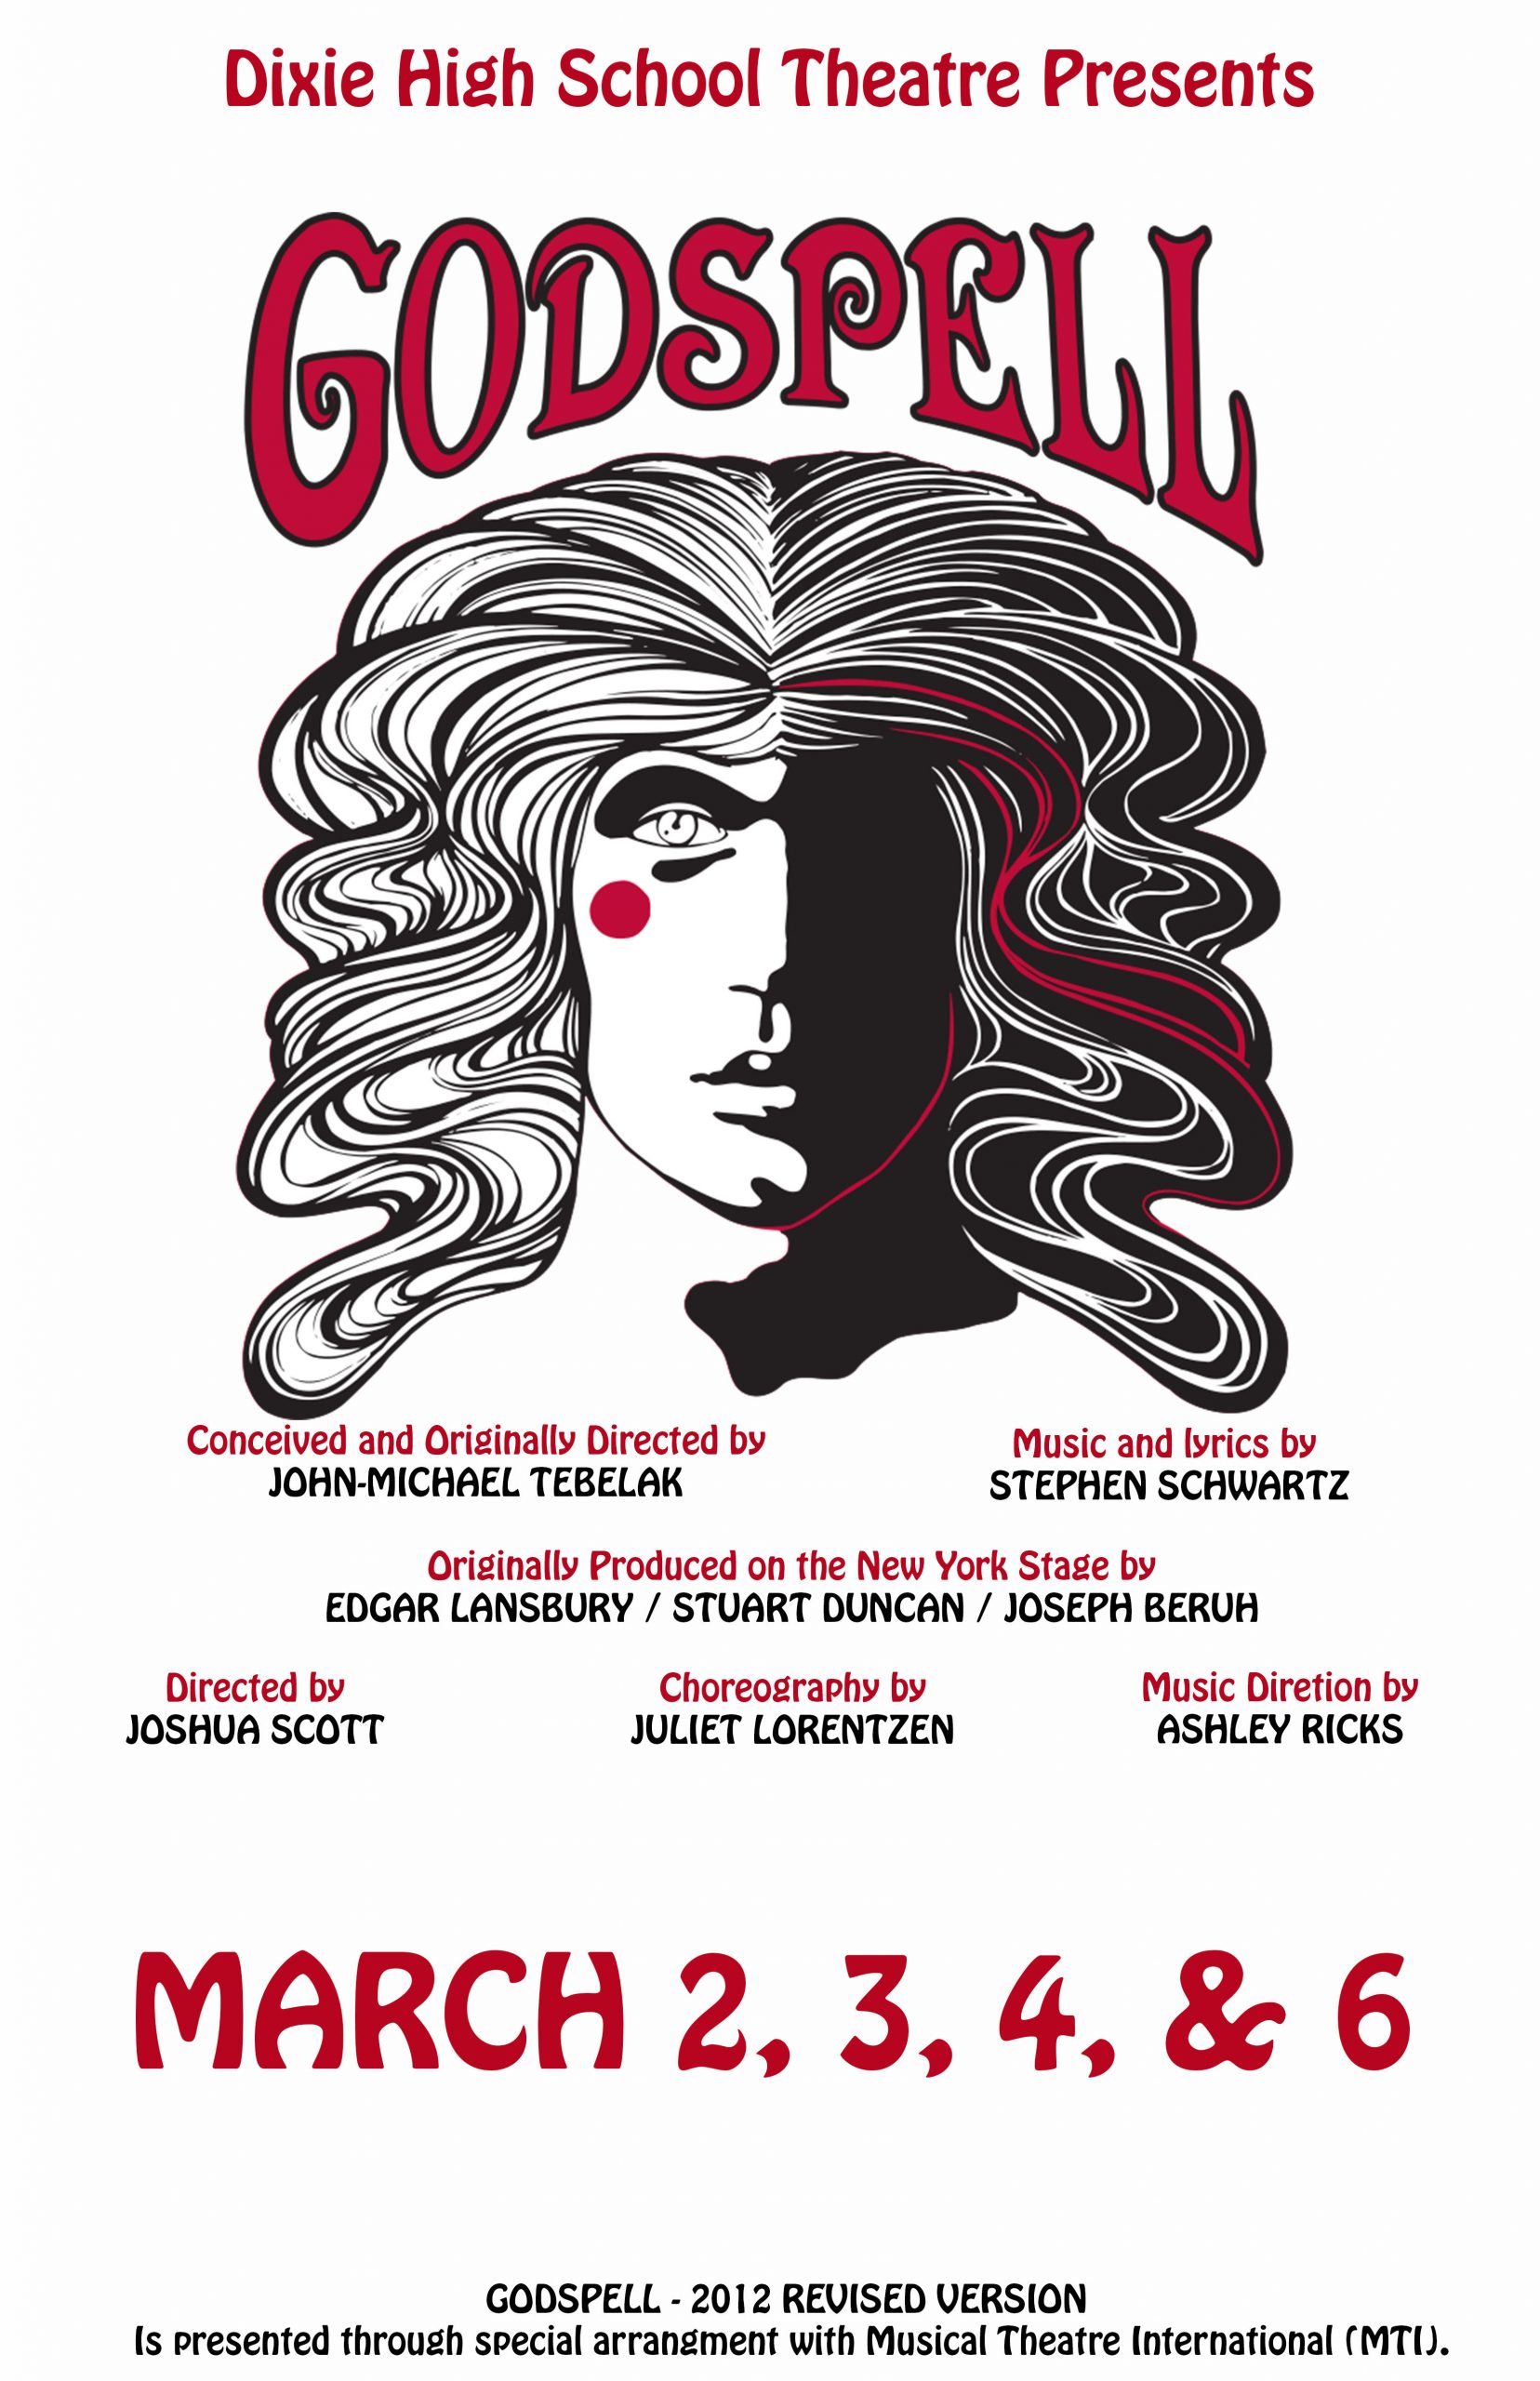 Godspell play poster. Title gives the name of the play: Godspell. Image features an illustration of a long-haired man with half of his face darkened by shadows. The following accreditations are listed at the bottom of the image: conceived and originally directed by John-Michael Tebalak, Music and lyrics by Stephen Schwartz, Originally produced on the New York State by Edgar Lansbury/Stuart Duncan/Joseph Beruh, directed by Joshua Scott, Coreography by Juliet Jorentzen, Music Direction by Ashley Ricks. Dates for the musical are March 2,3,4, & 6. Copyright information at the bottom of image reads: Godspell - 2012 Revised Version is Presented through special arrangement with Musical Theatre International (MTI).